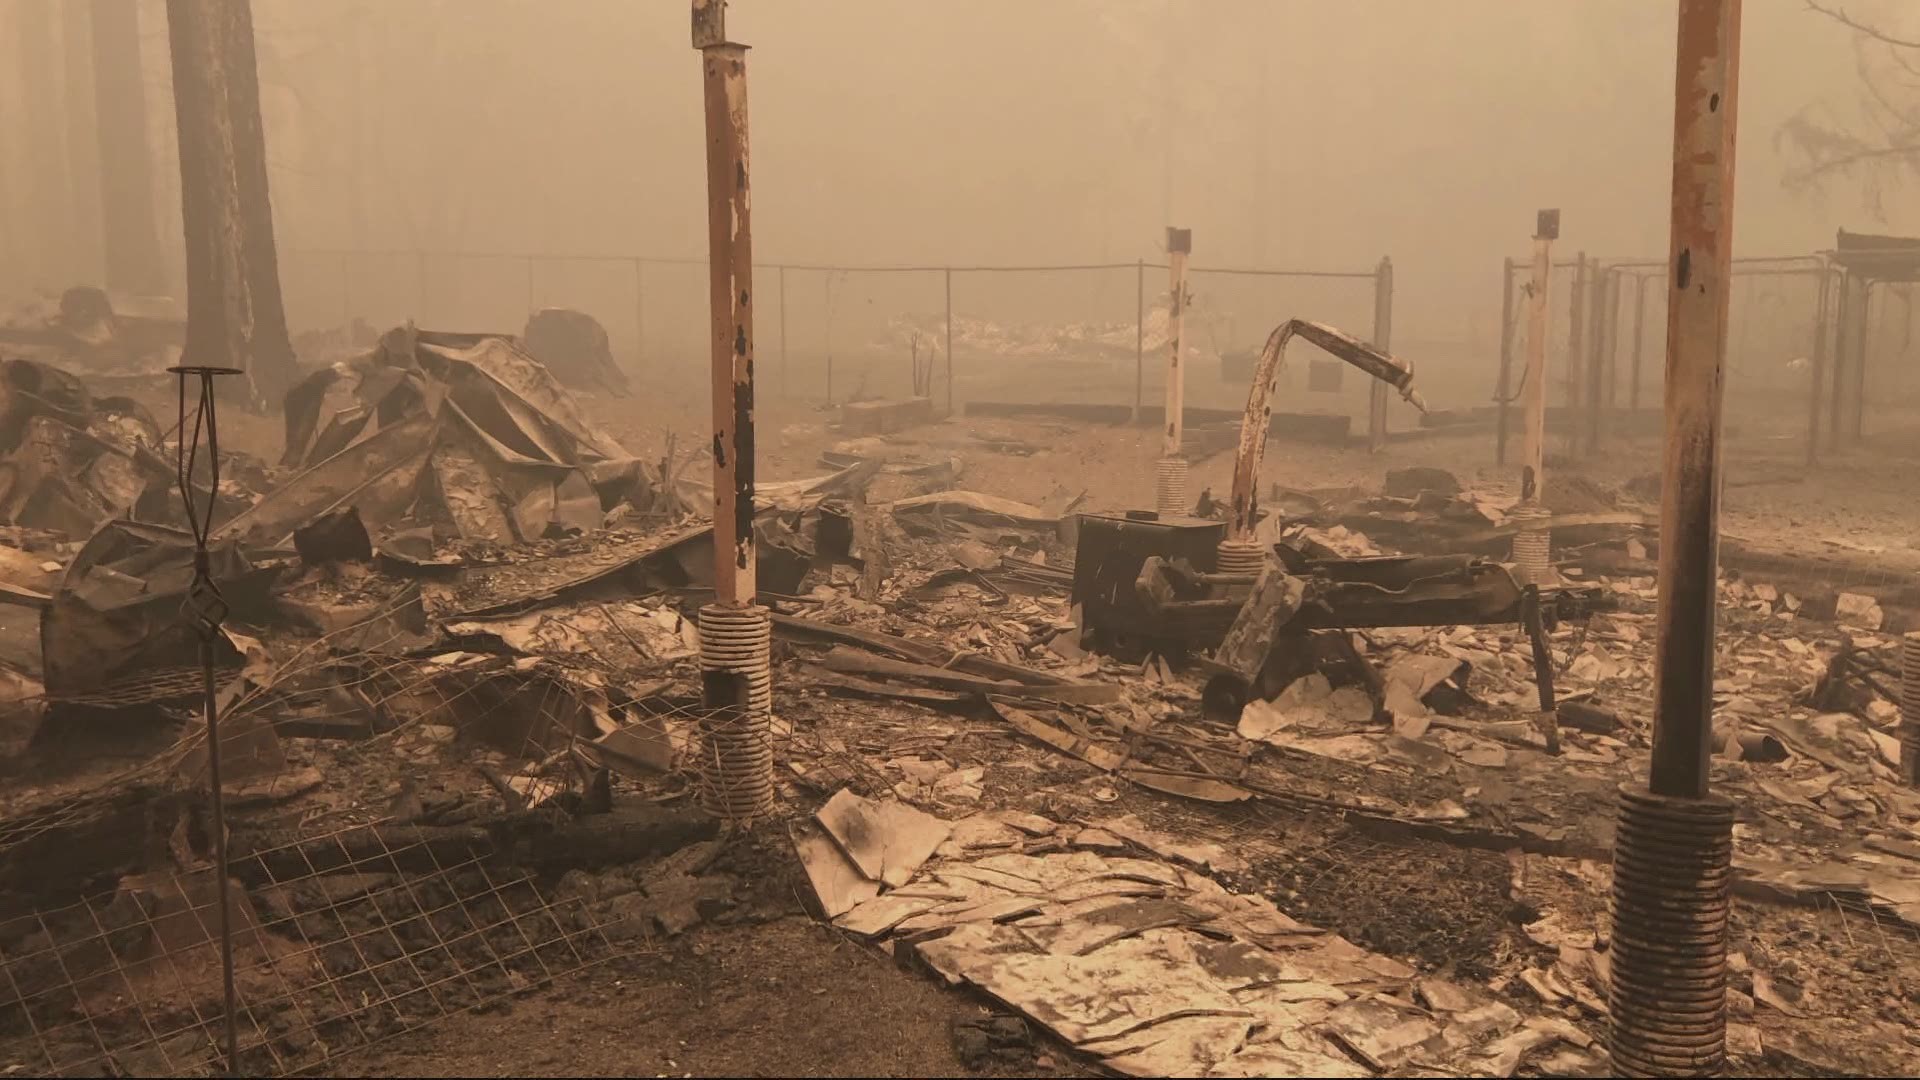 KGW's Morgan Romero spoke to an Oregon family unable to rebuild the home they lost in last year's wildfires because of high lumber costs.